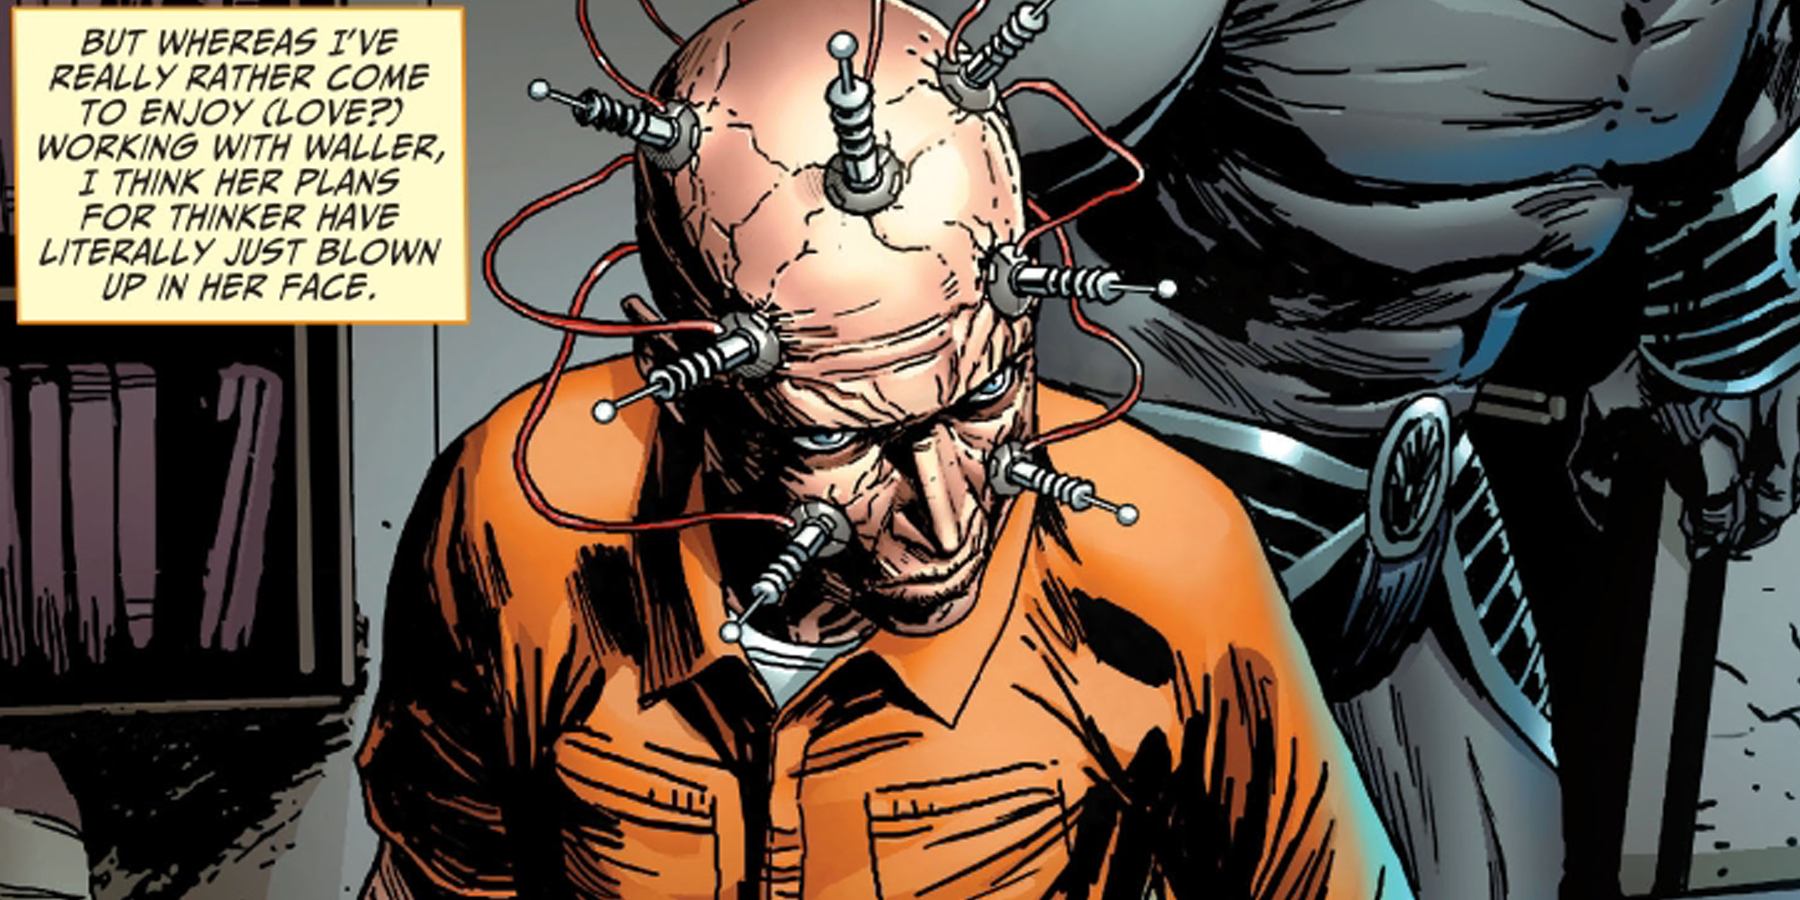 A comic book scene of a man in an orange prison suit with wires attached to his brain